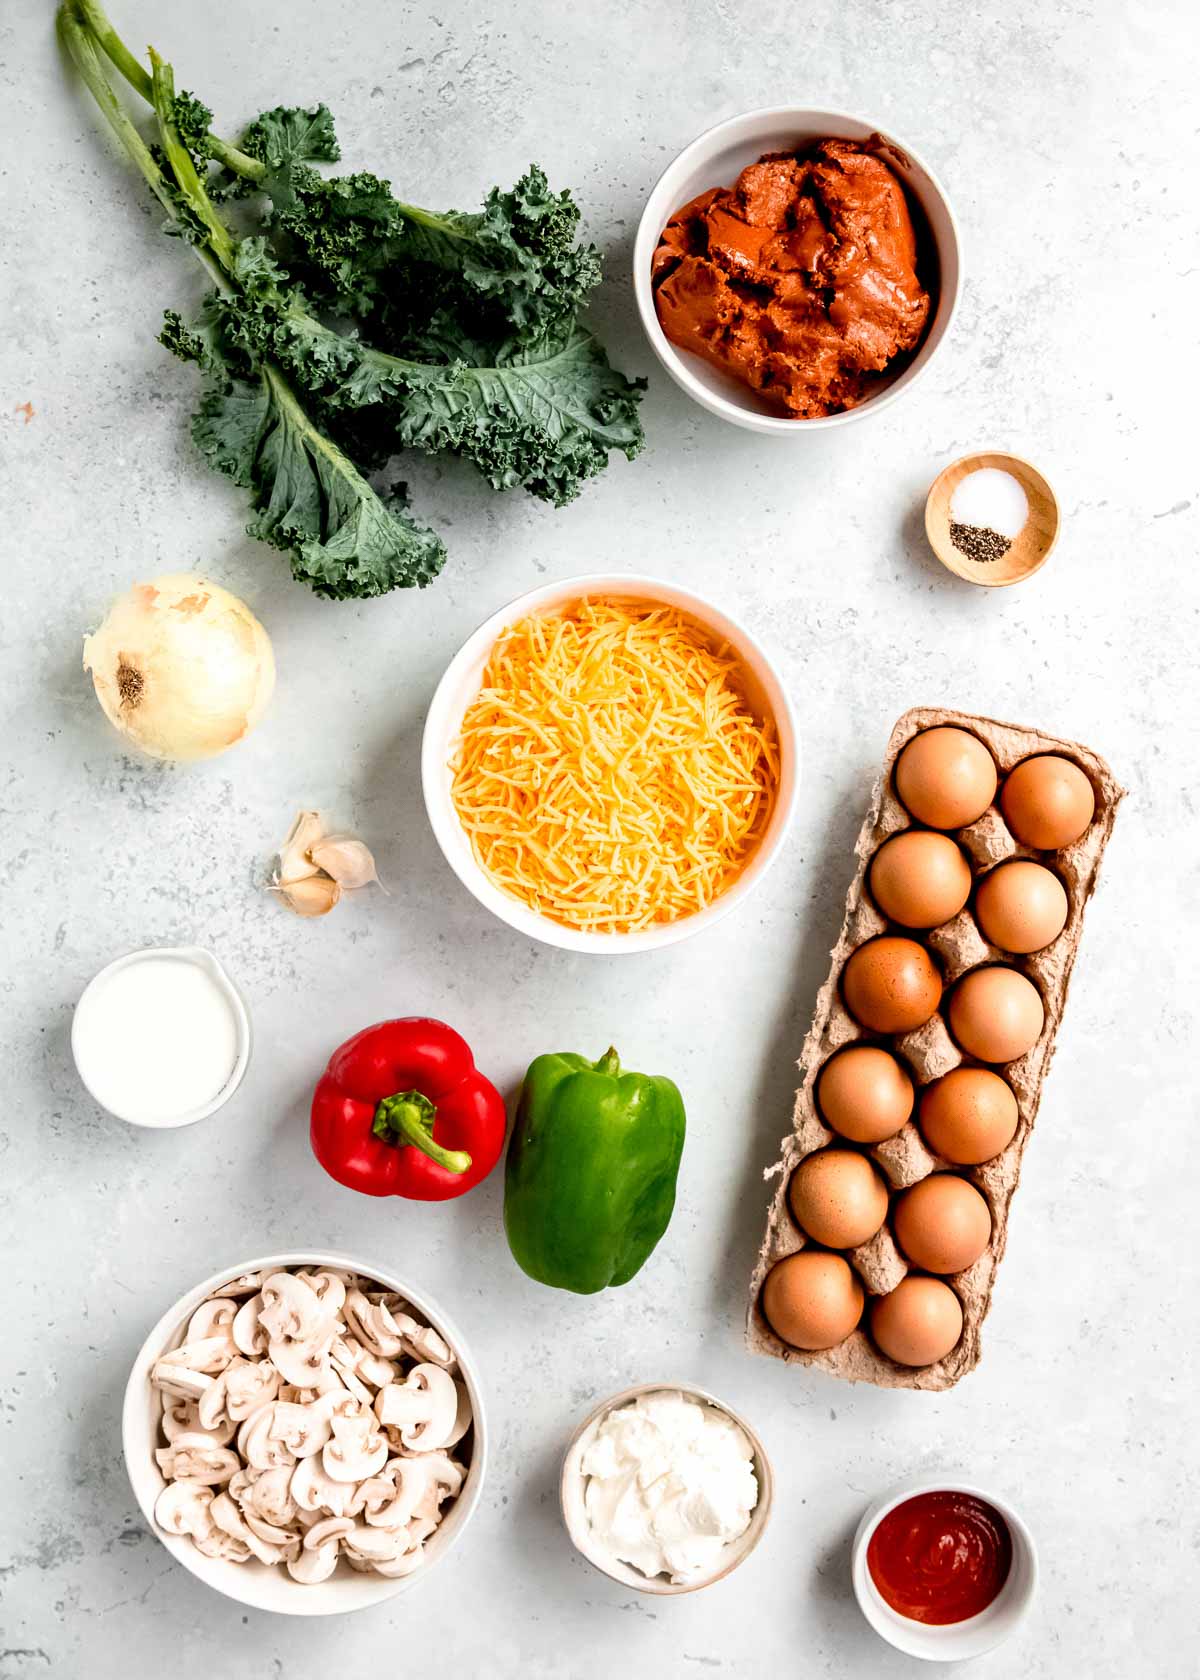 ingredients for low carb breakfast casserole with sausage and vegetables